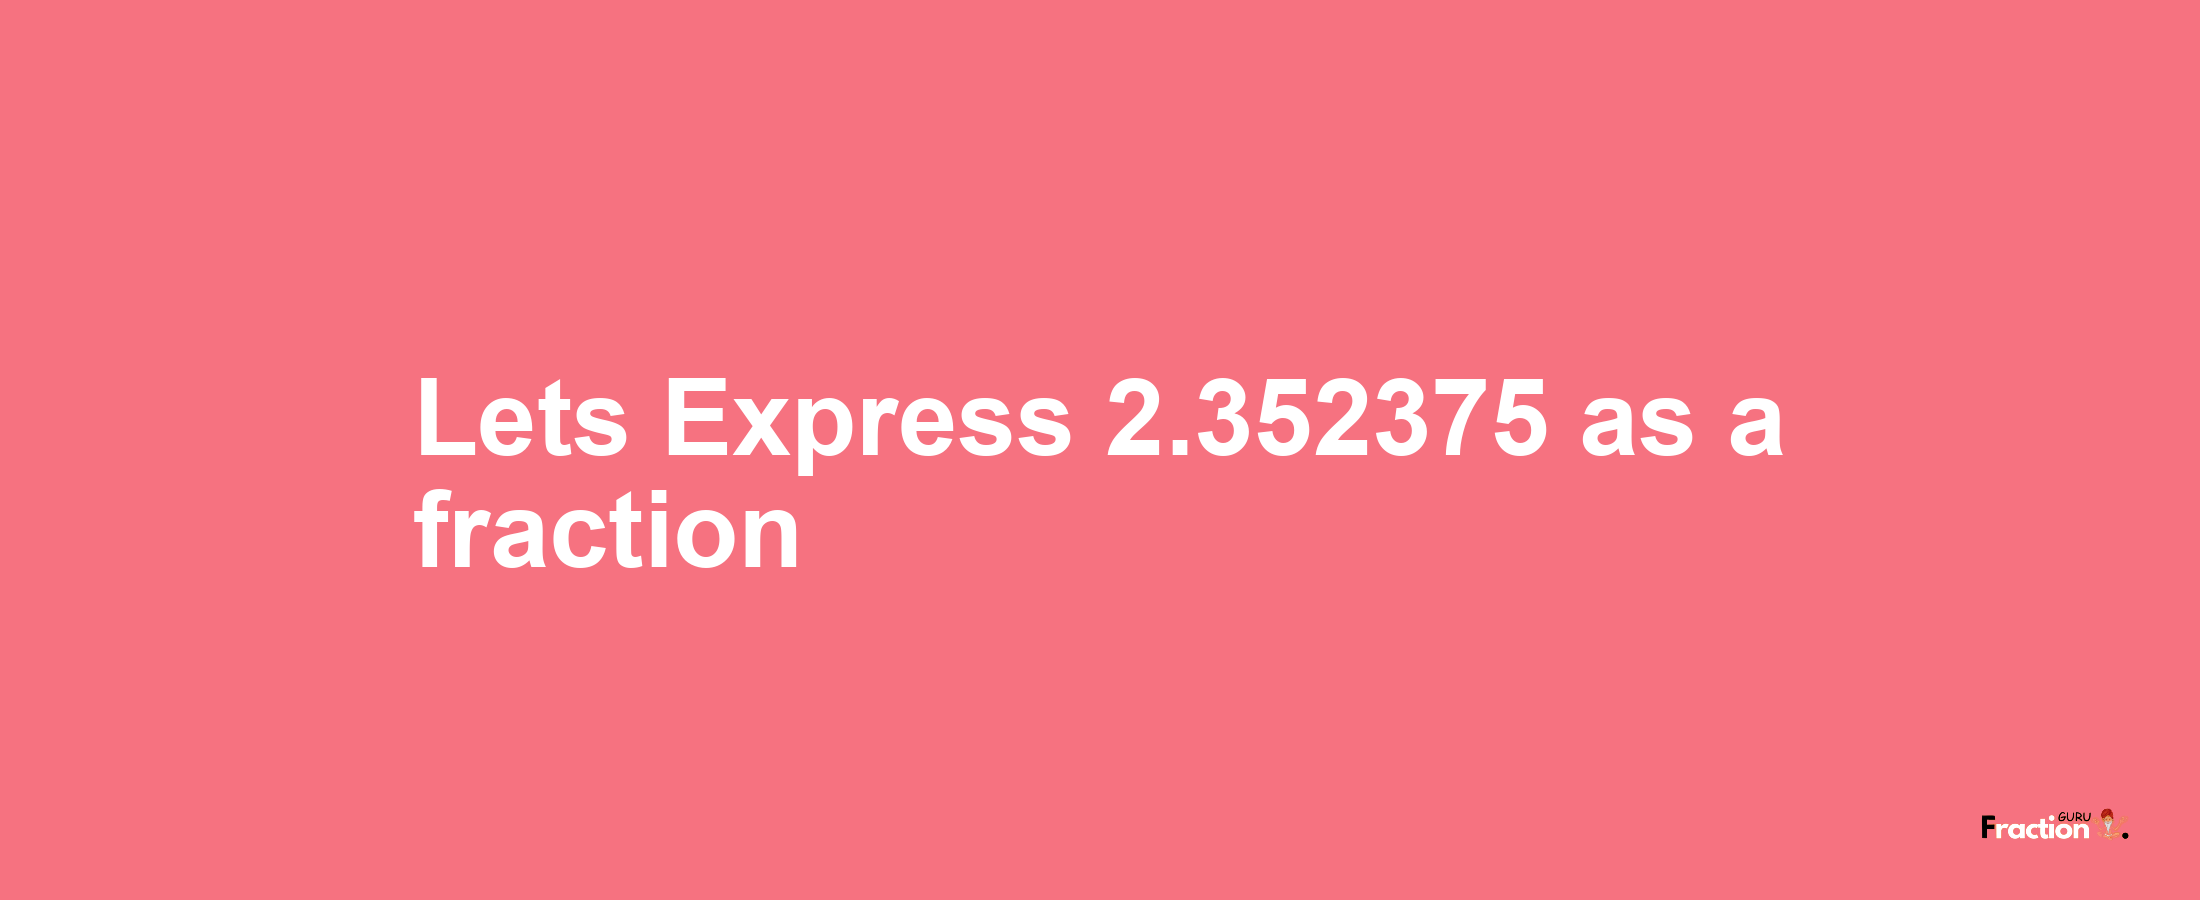 Lets Express 2.352375 as afraction